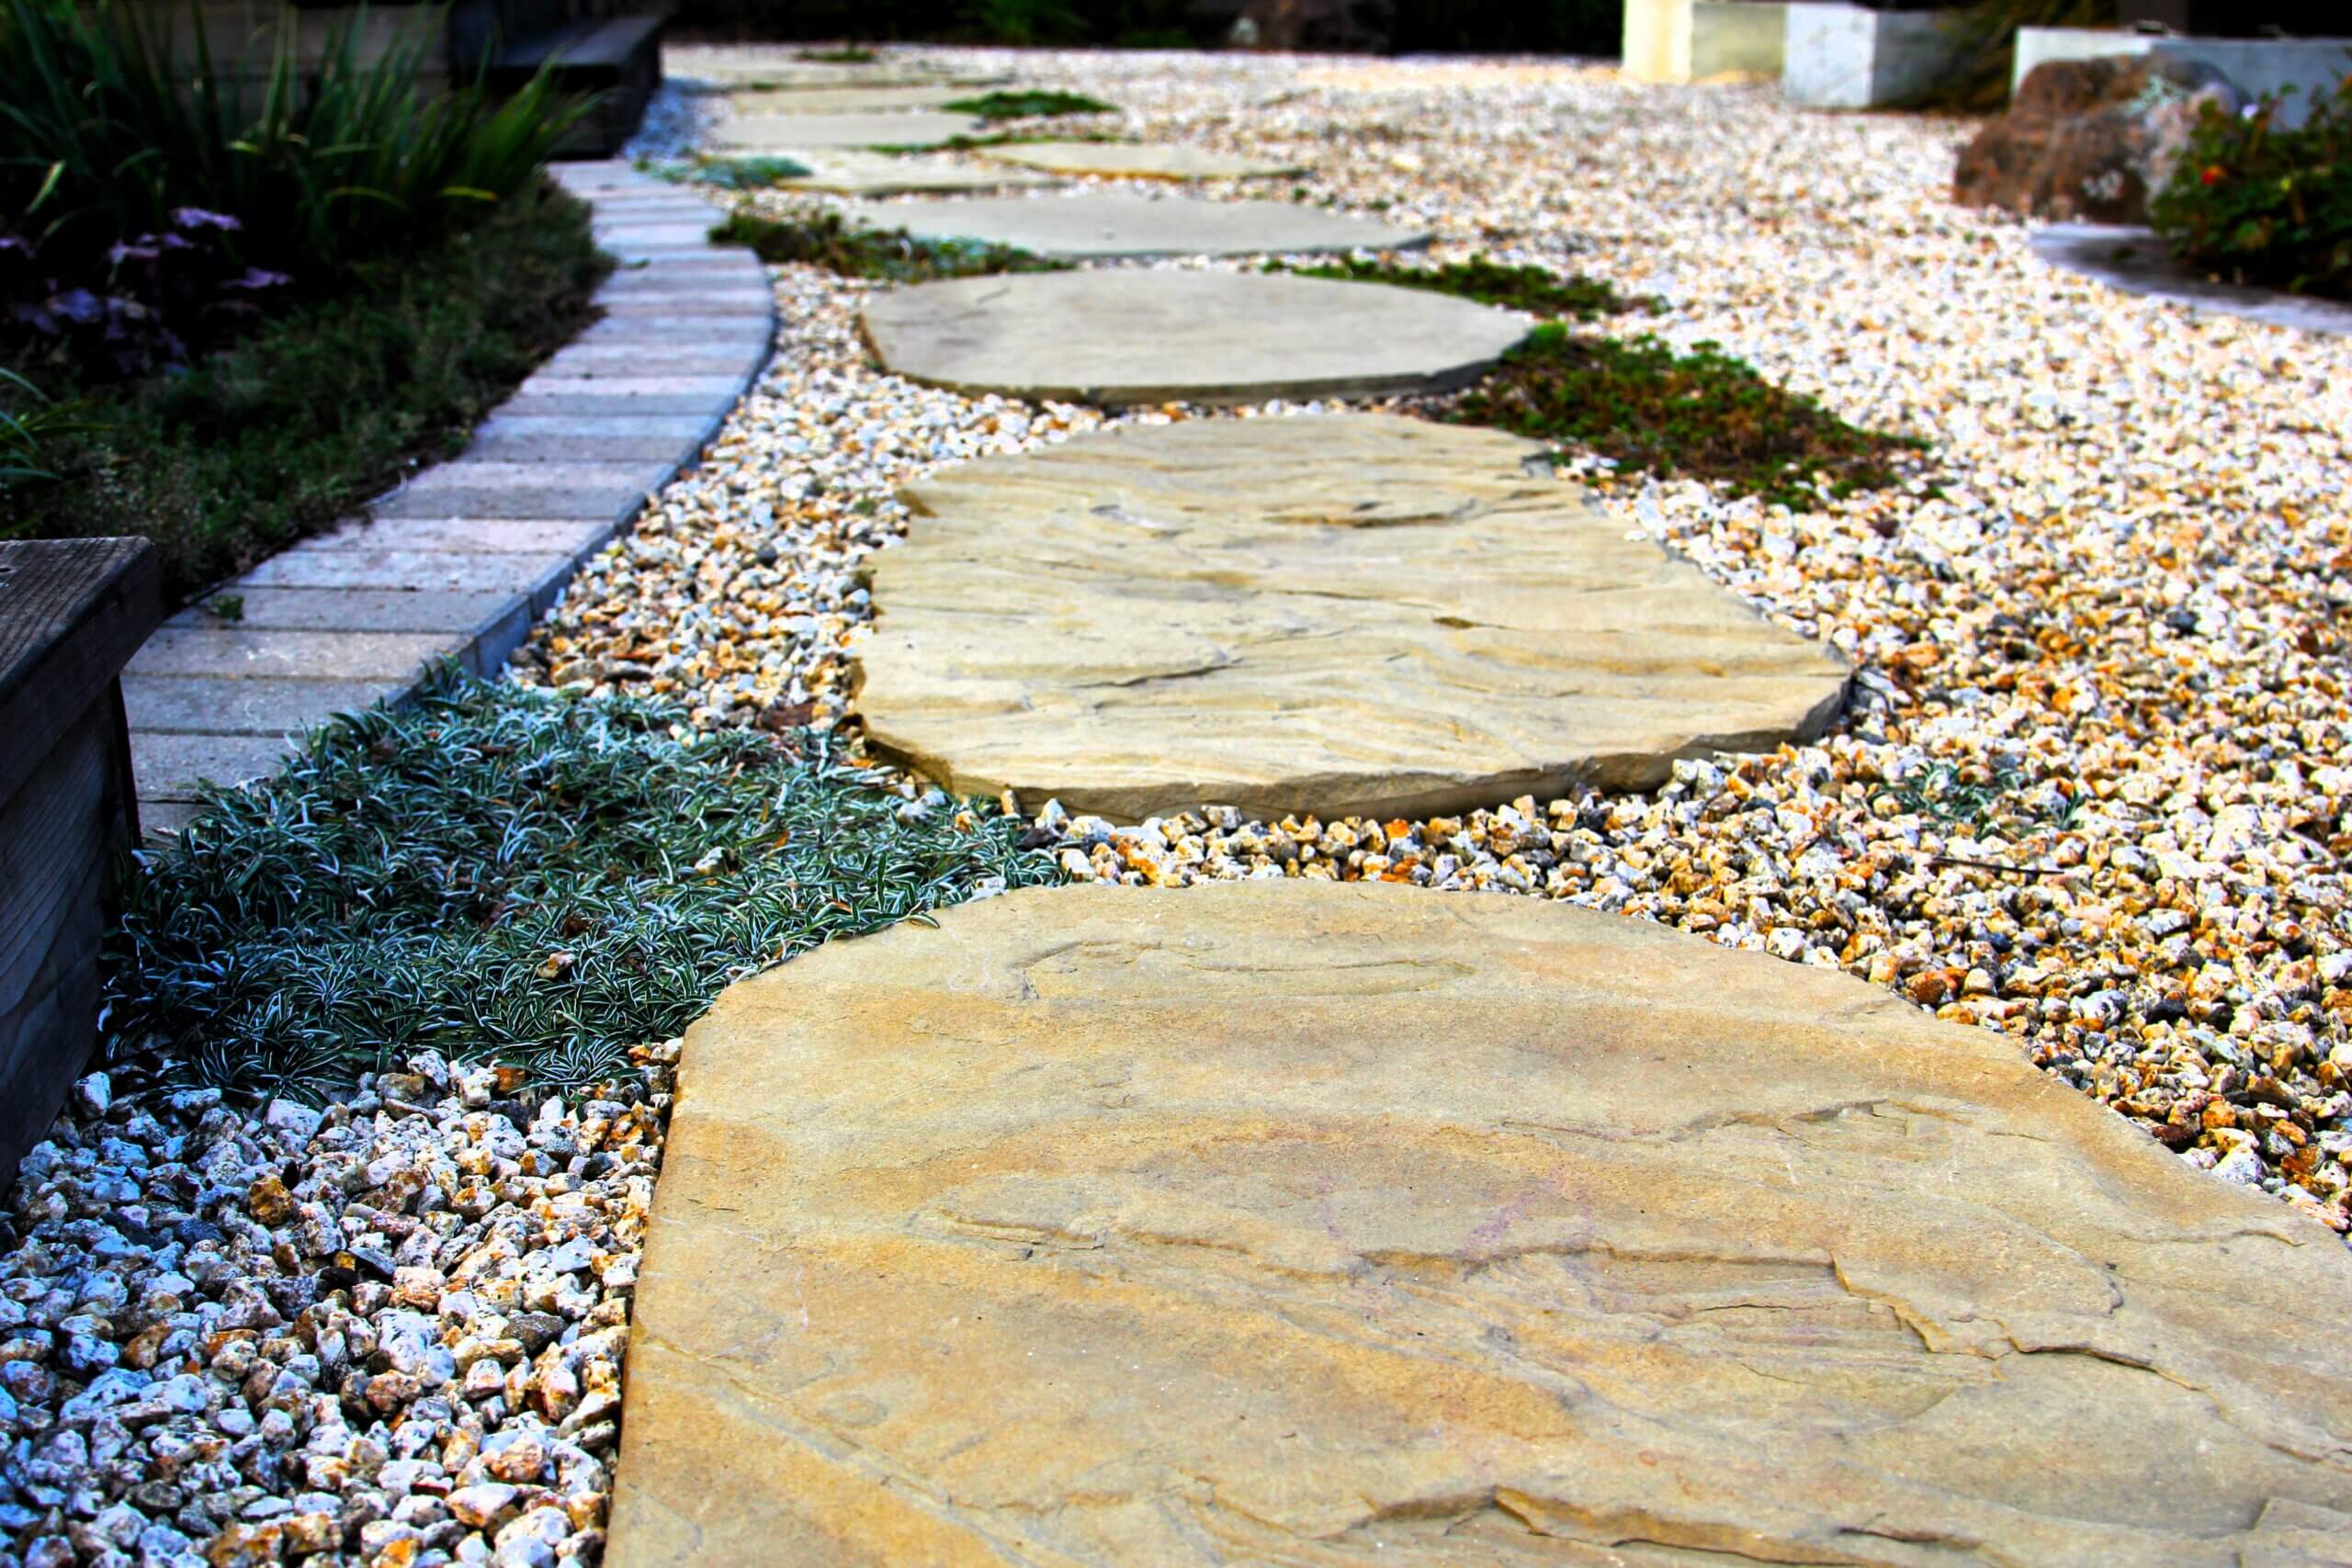 Rough stone pathway surrounded by gravel and bricks with ground cover interspersed.